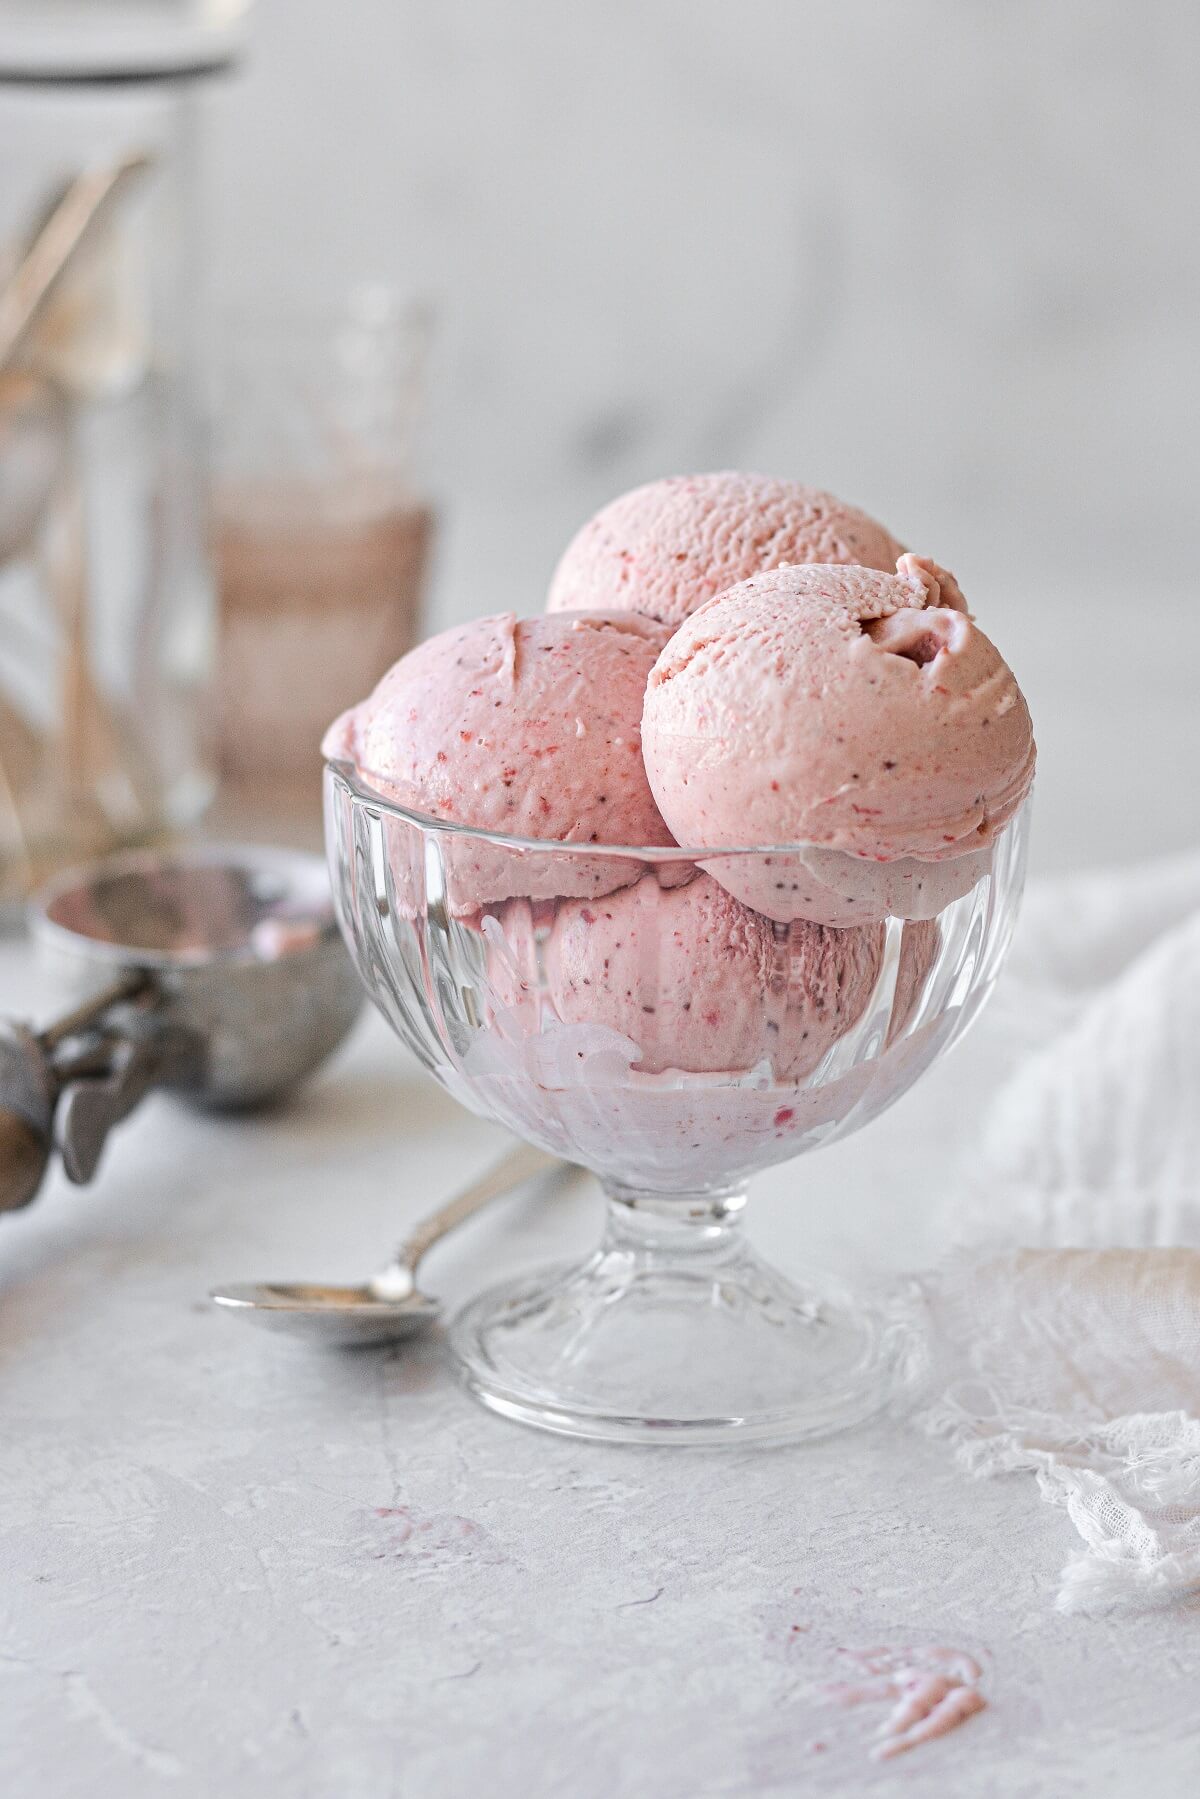 Scoops of roasted strawberry ice cream in a glass ice cream dish.